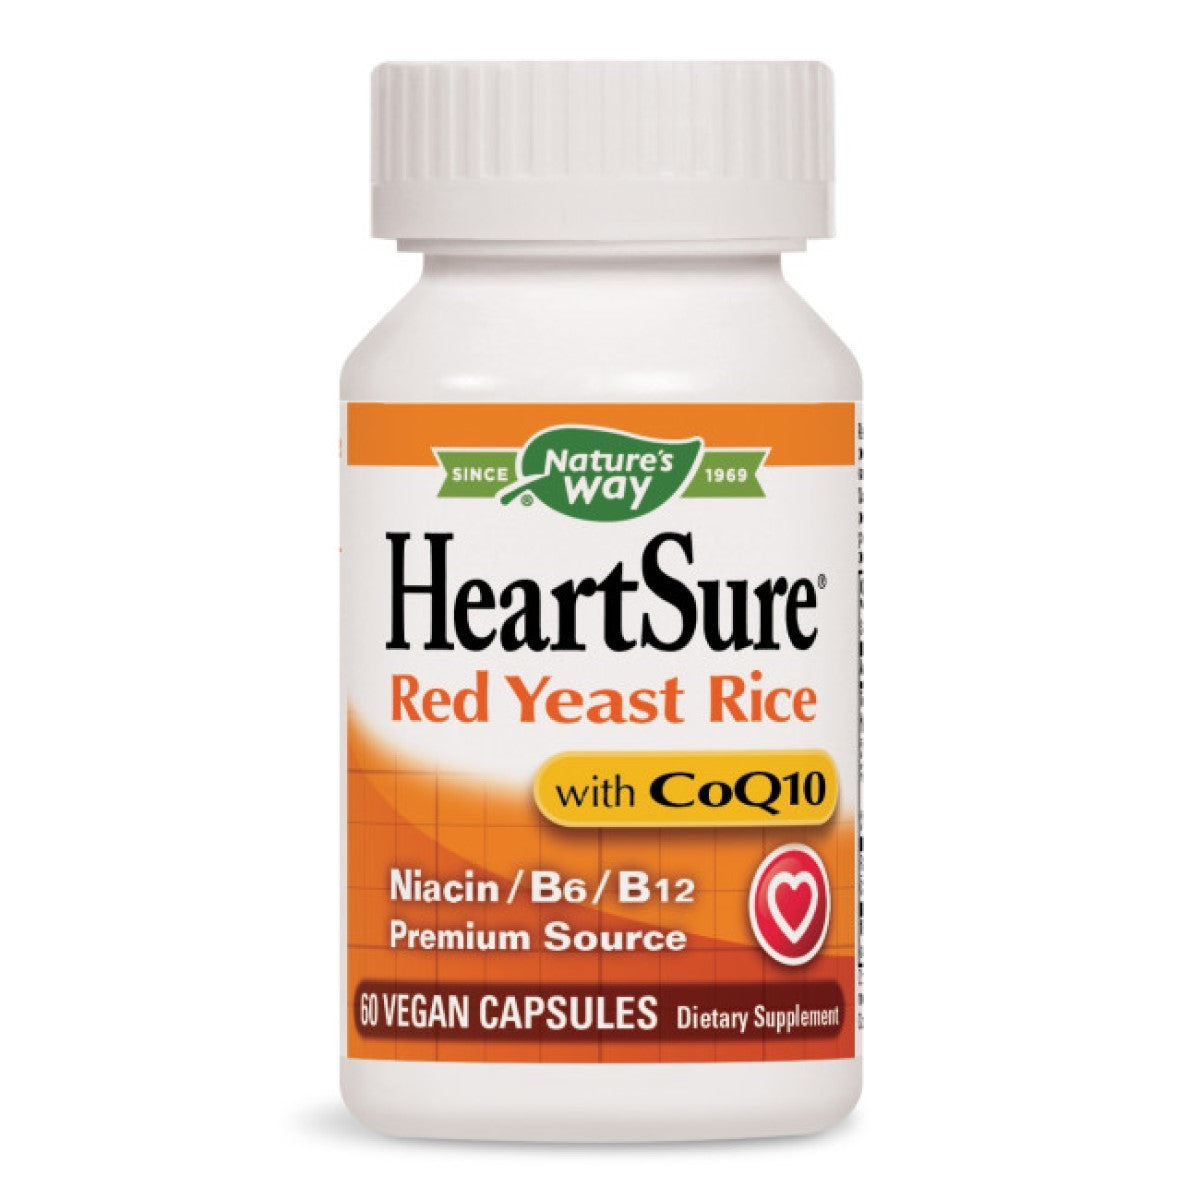 Fæstning biord velfærd Nature's Way HeartSure Red Yeast Rice + CoQ10 (60 count) – Smallflower